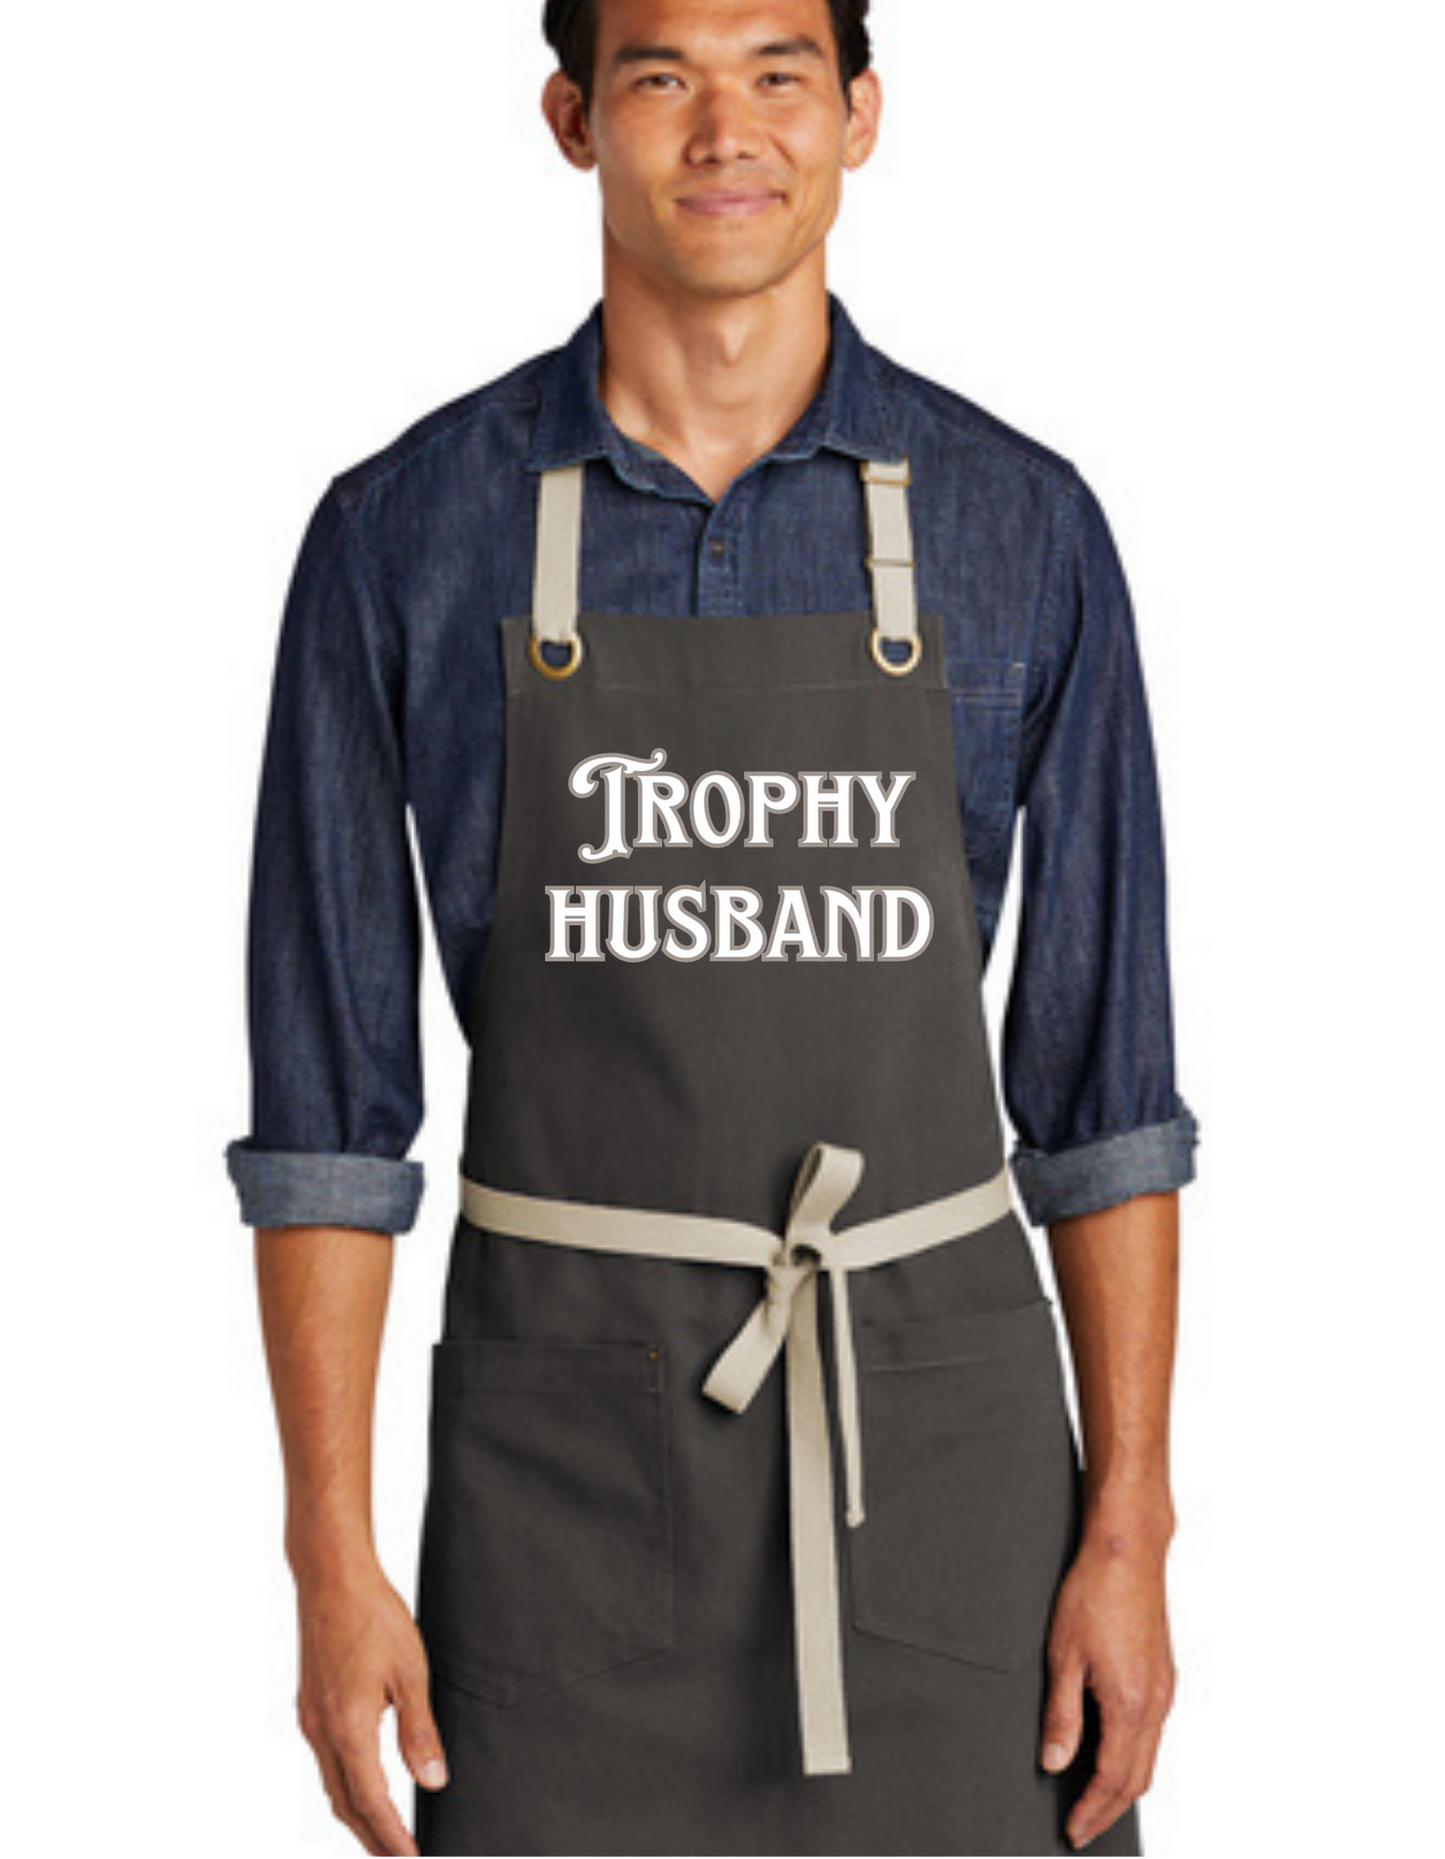 Trophy Husband Full Length Magnet and Stone Apron